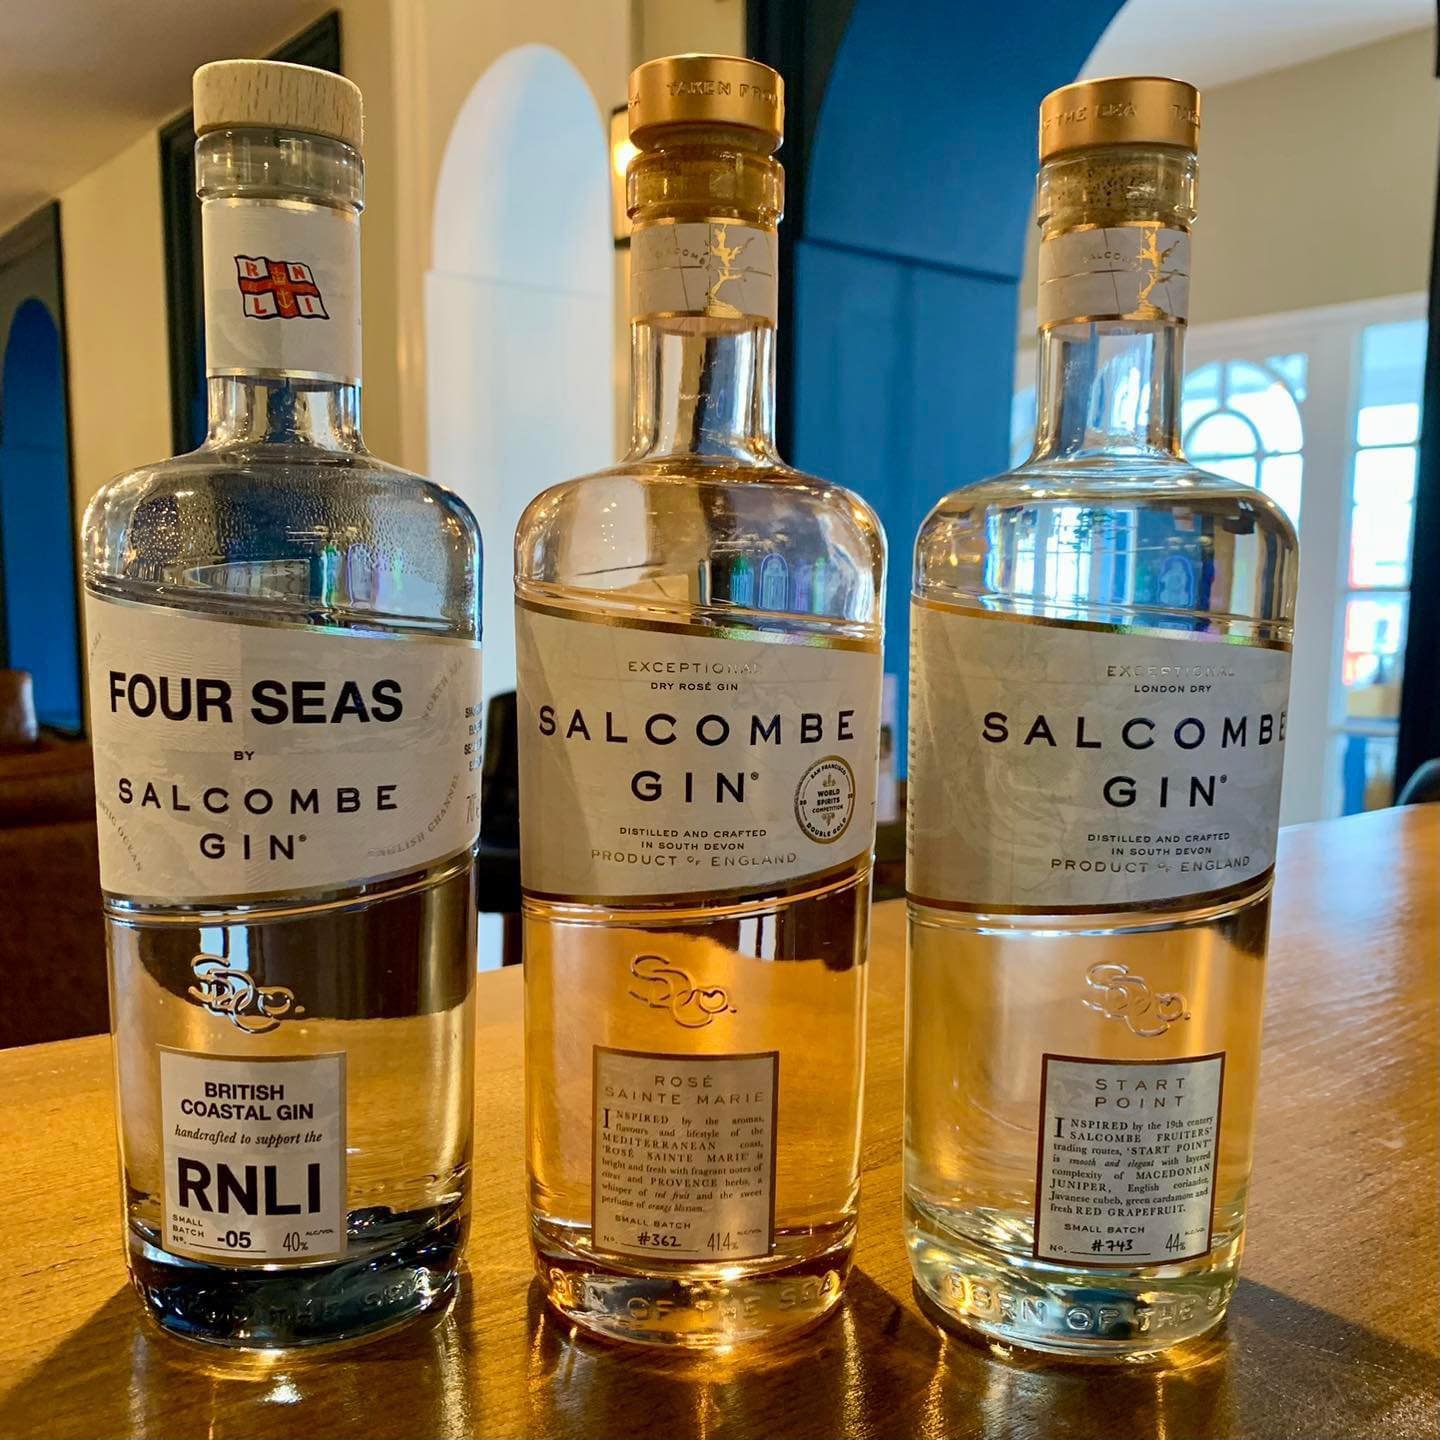 Introducing @salcombegin , we now have available Salcombe Start Point, Rose Sainte Marie, RNLI Coastal Gin and New London Light Midnight Sun 

10% of each bottle of RNLI Coastal Gin goes to the RNLI

See you at the bar!